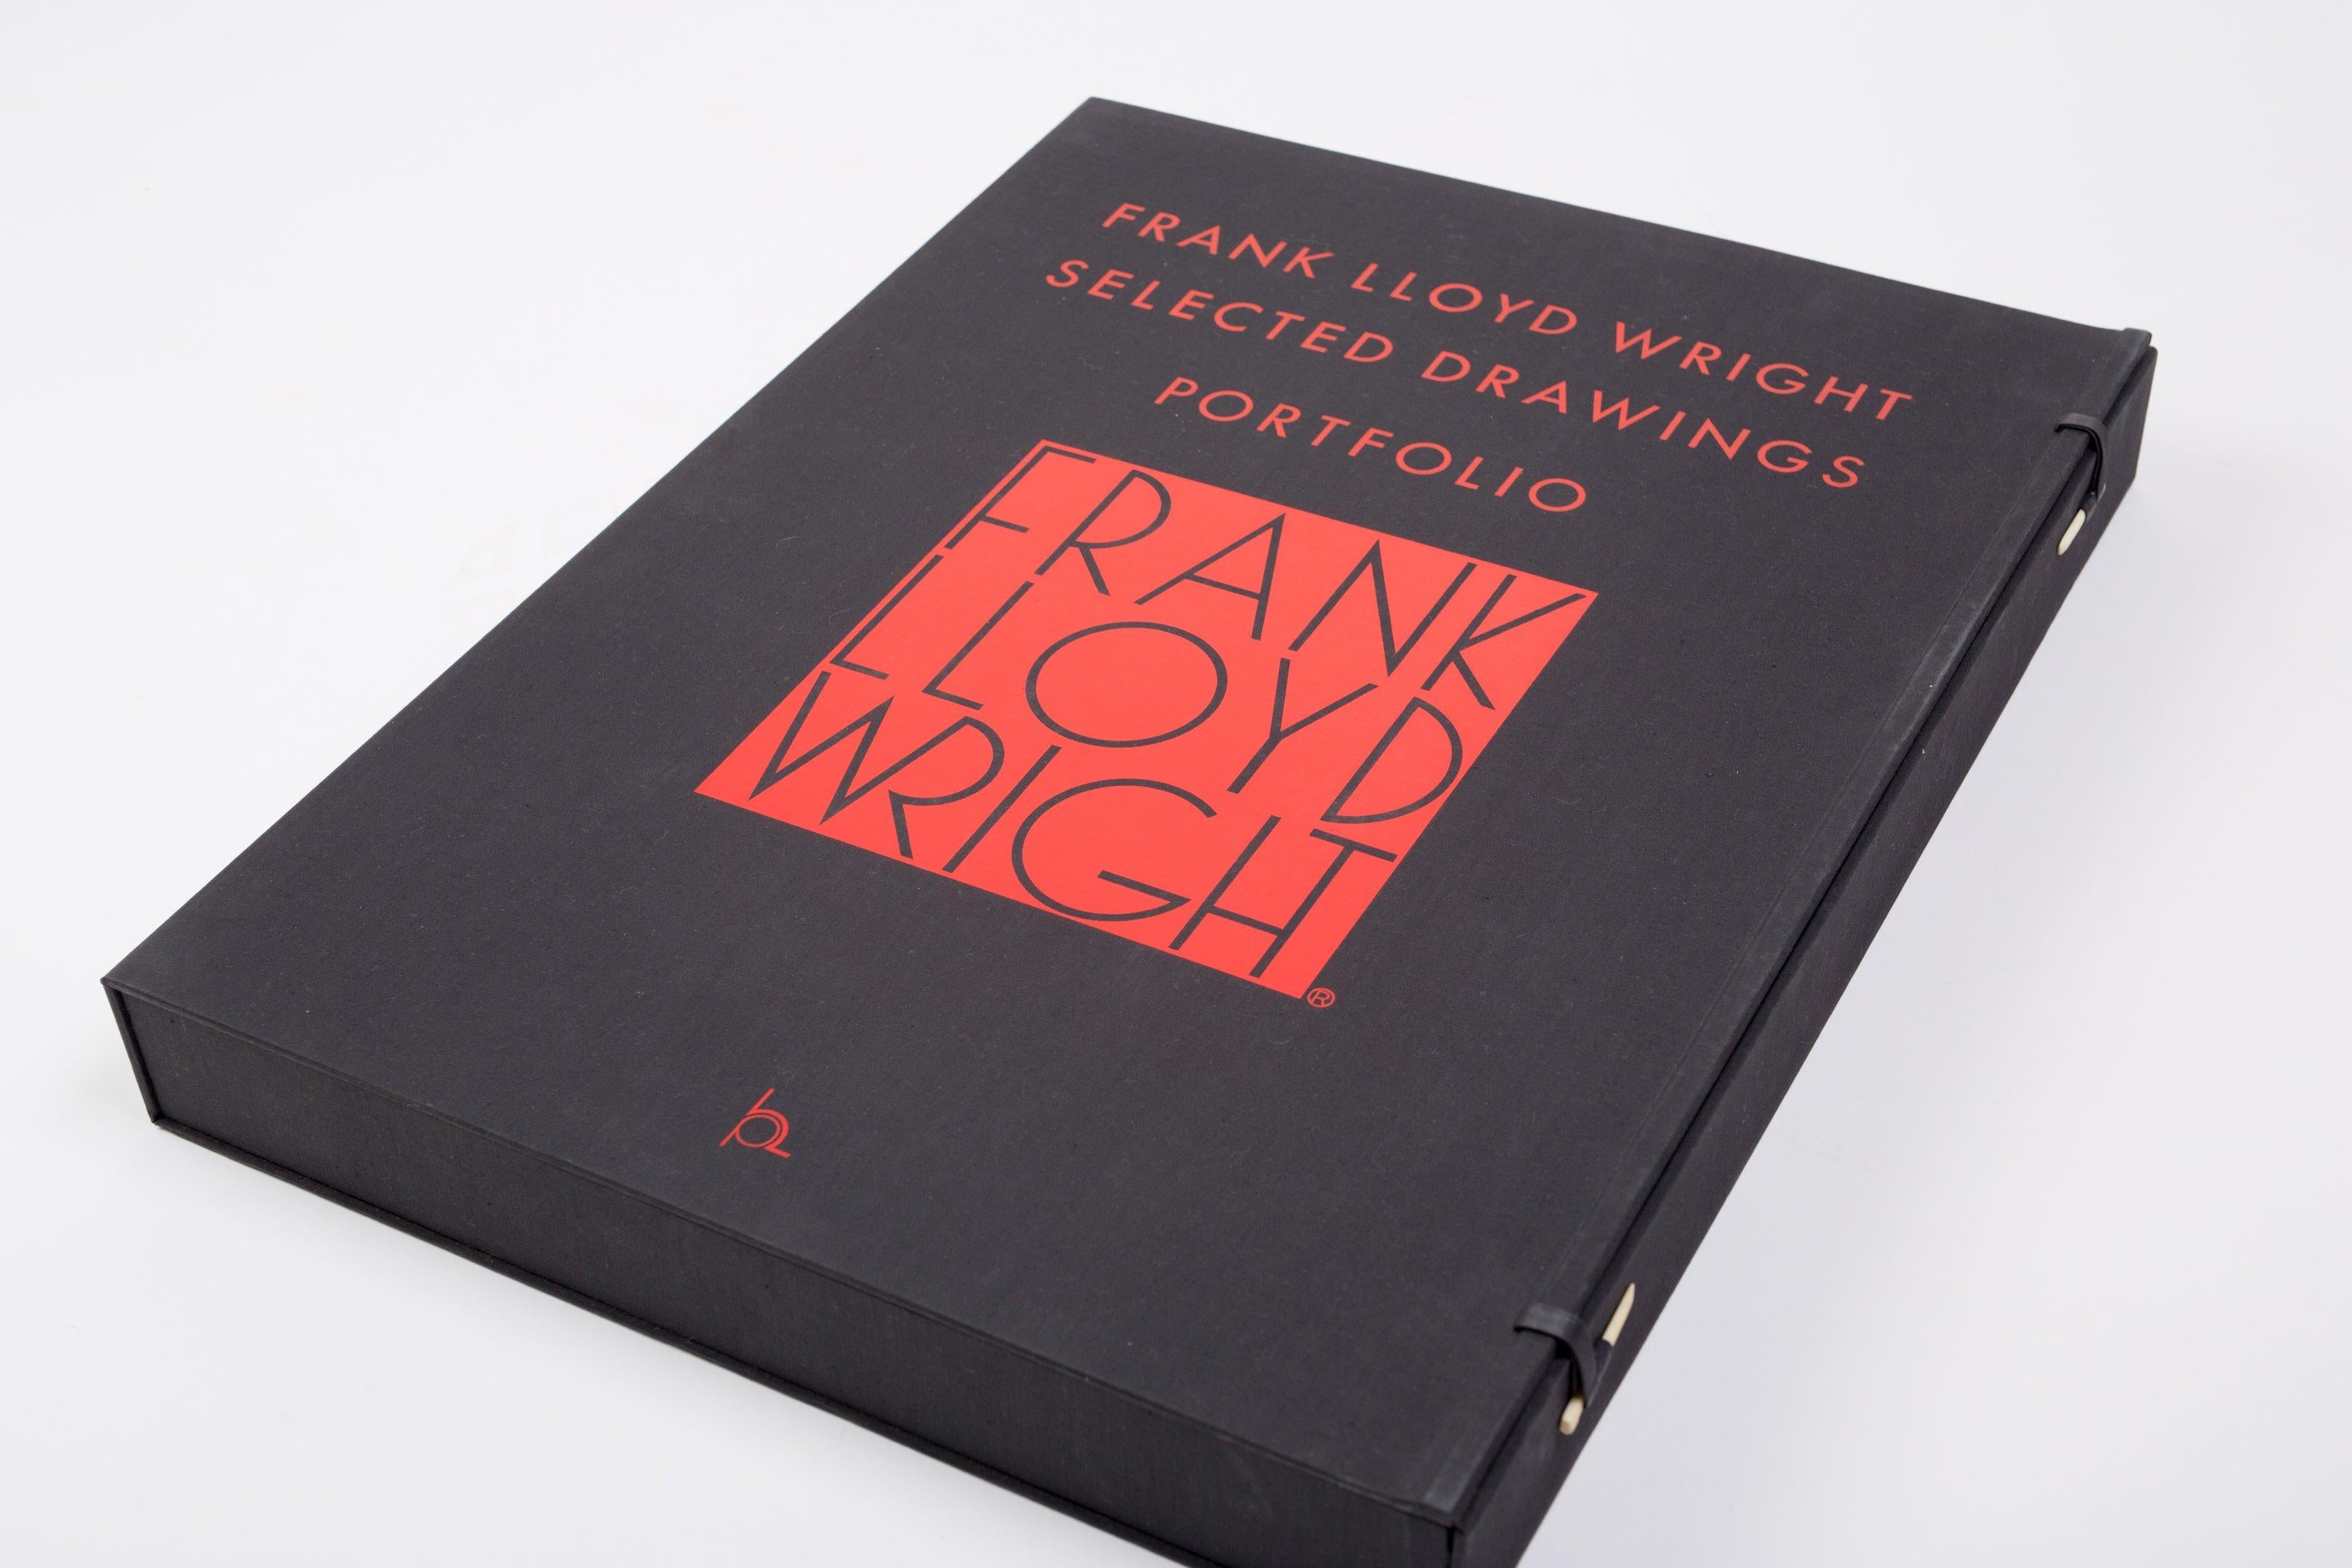 Wright, Frank Lloyd. Selected drawings portfolio volume 1. New York: Horizon Press, 1977. Edition #A201/500. Large folio, 50 color plates, contained within a black cloth case. 

Presented is Volume 1 of Frank Lloyd Wright’s Selected Drawing